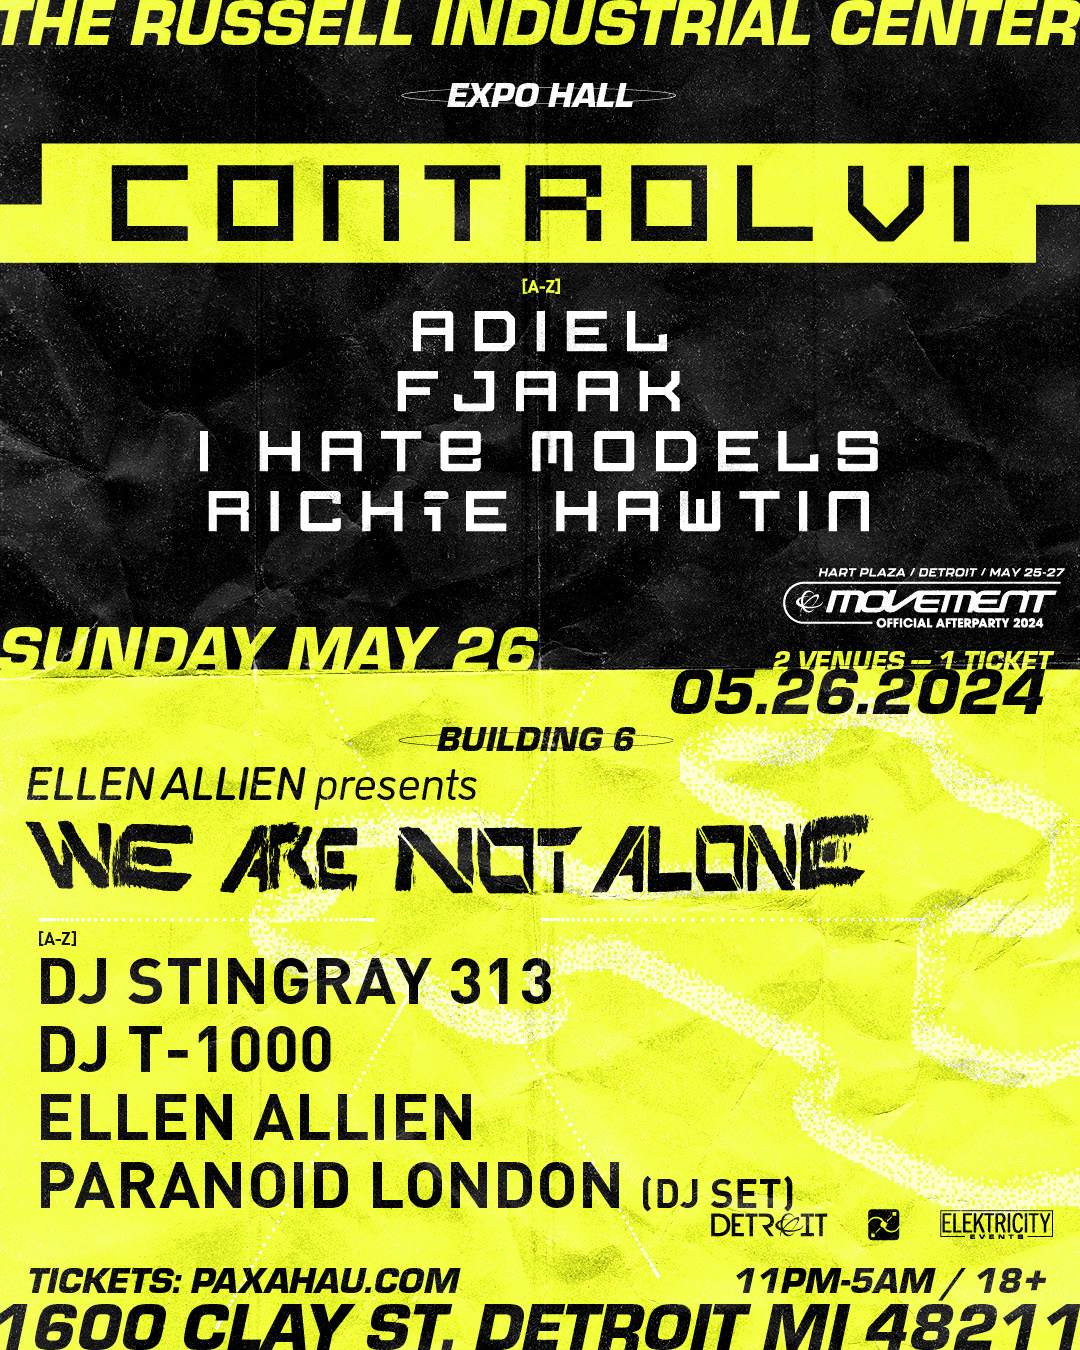 Control VI & We Are Not Alone - Official Movement Afterparty - Página frontal